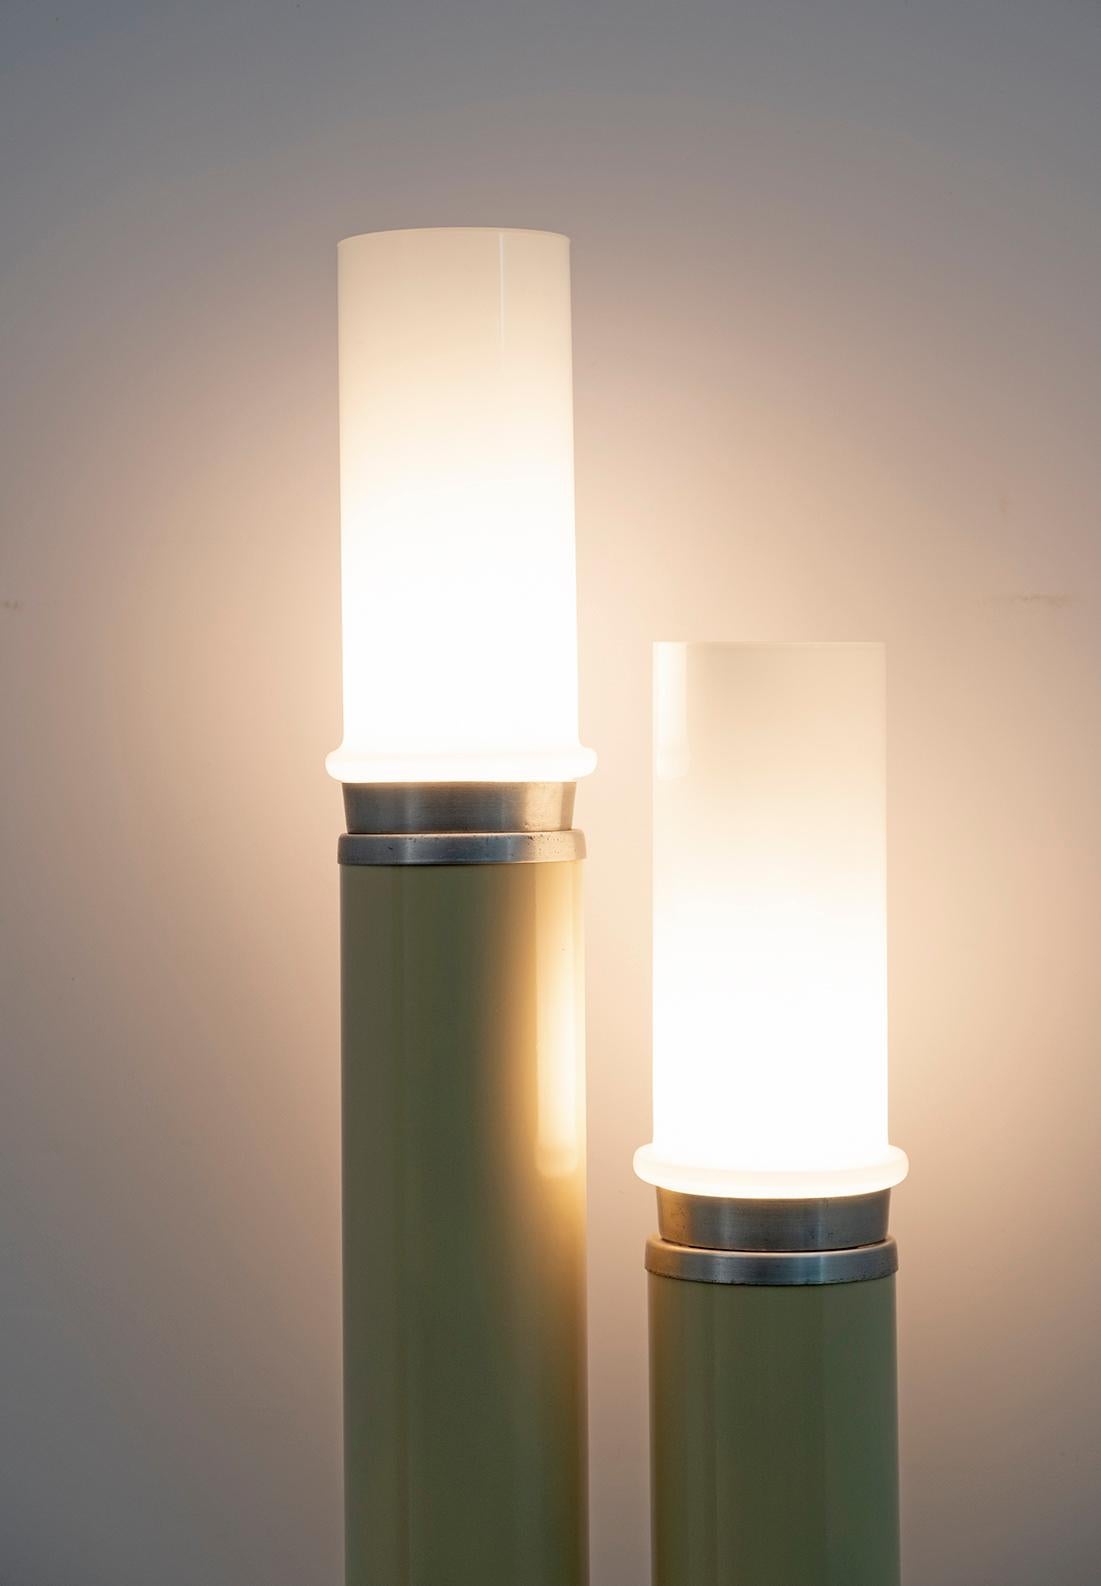 Space Age Opaline Glass and Lacquered Metal Cylinders Floor Lamp, 1970s For Sale 2